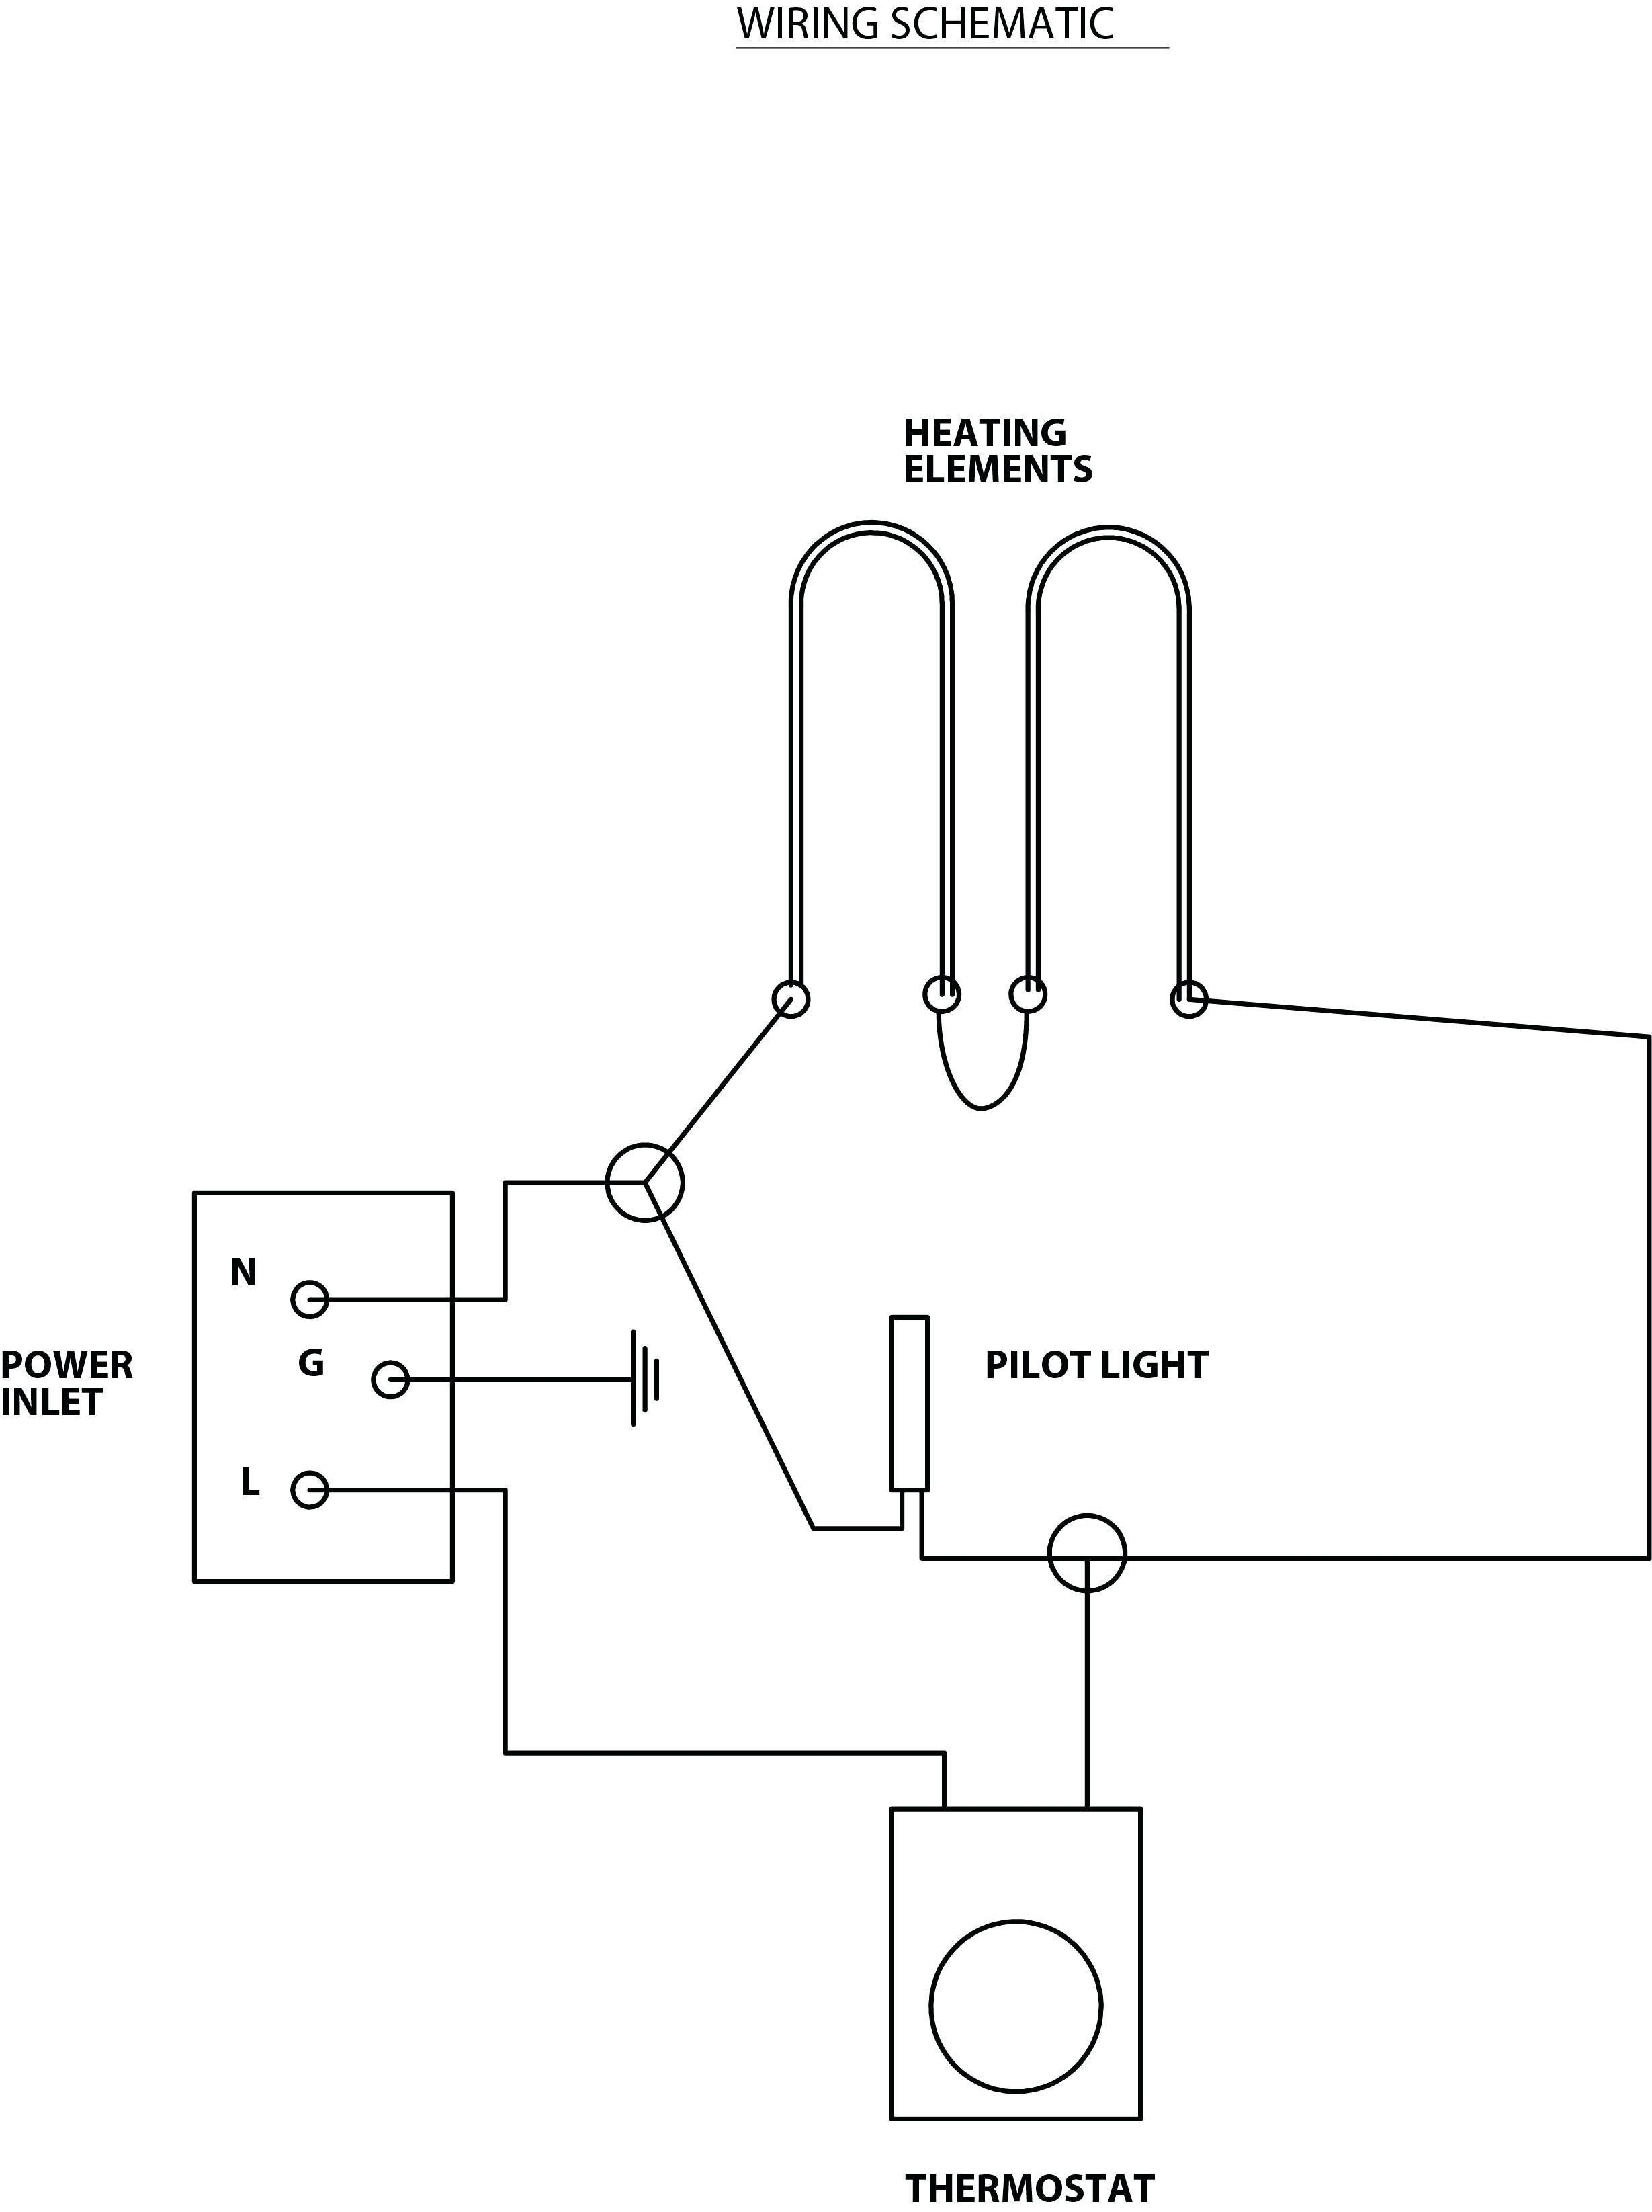 Thermostat Wiring Diagram Wire Diagram For 240v Heater Wiring Diagram Information